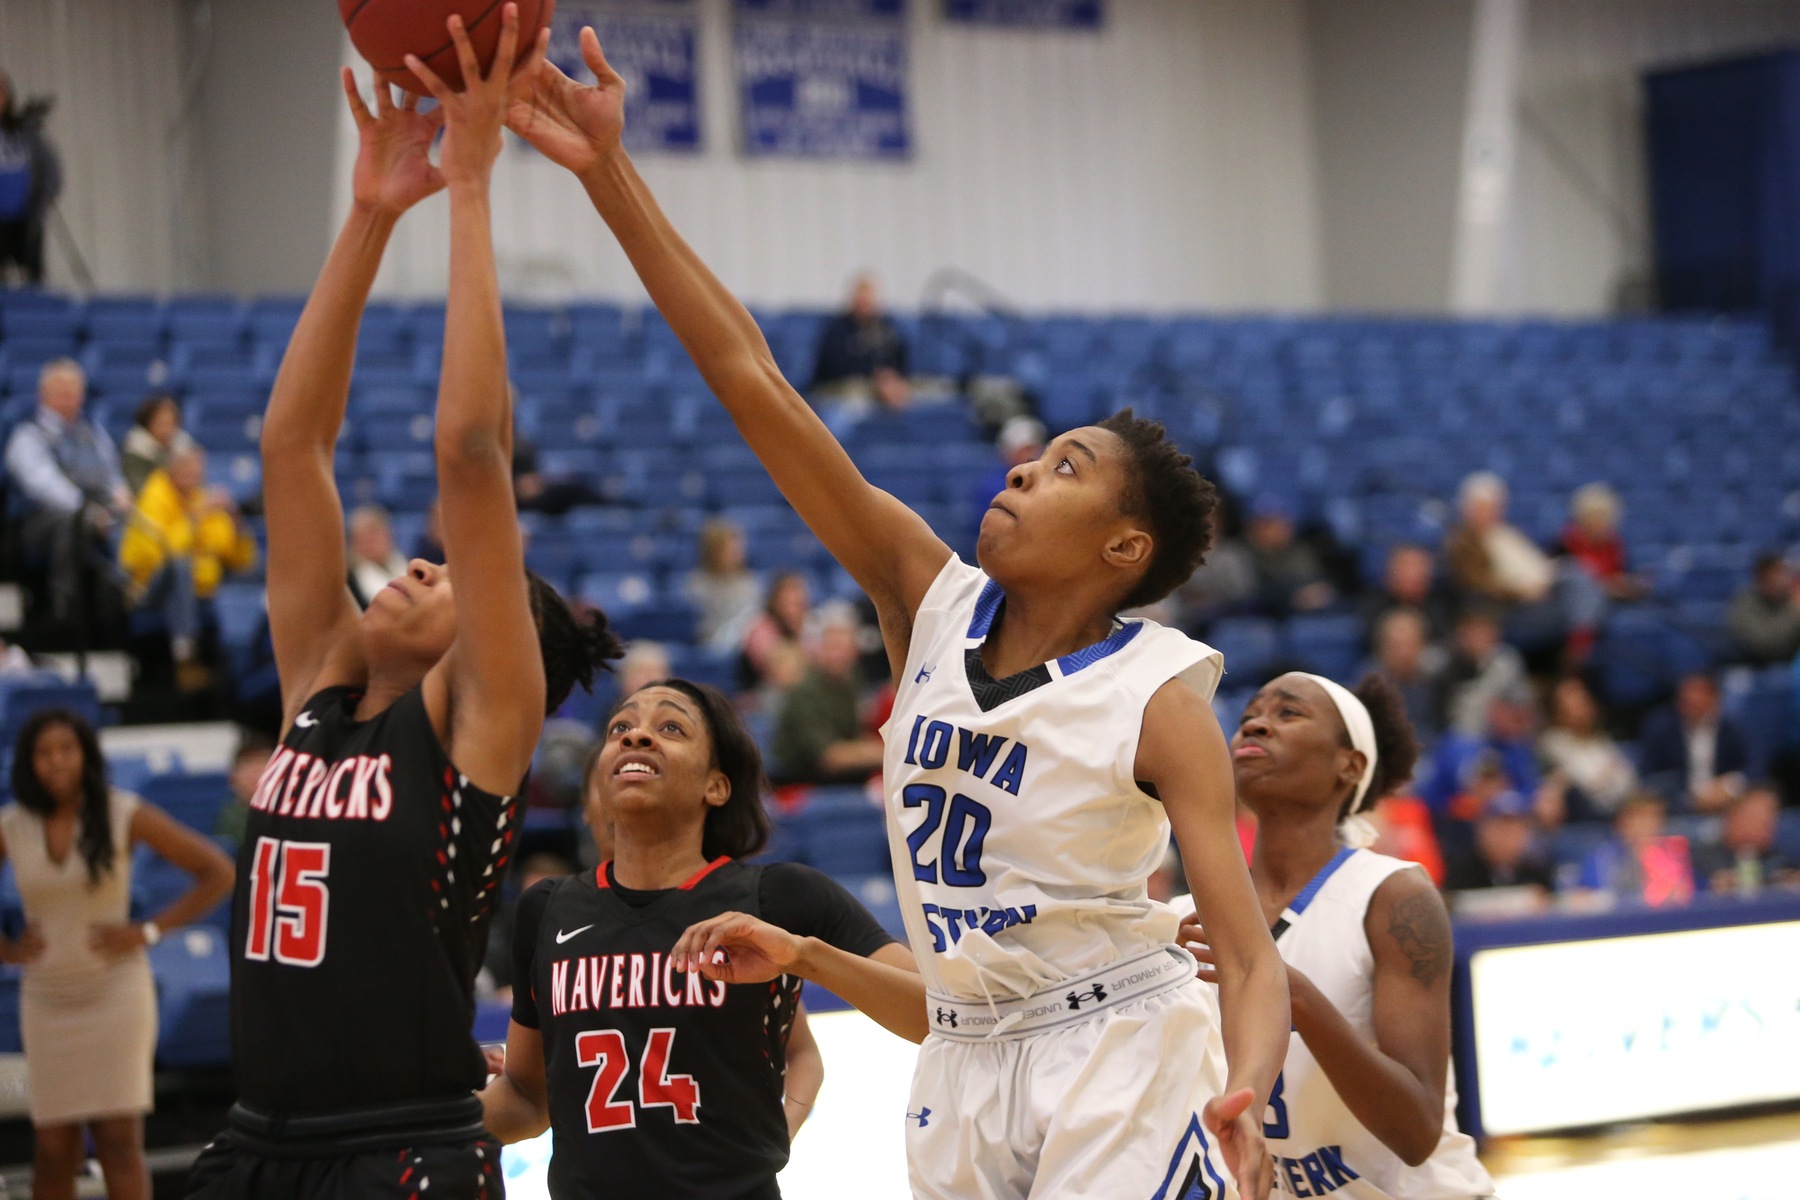 Sophomore forward Christelle Nyuachi controlled the paint in a dominant performance for the Reivers win over Jefferson College.